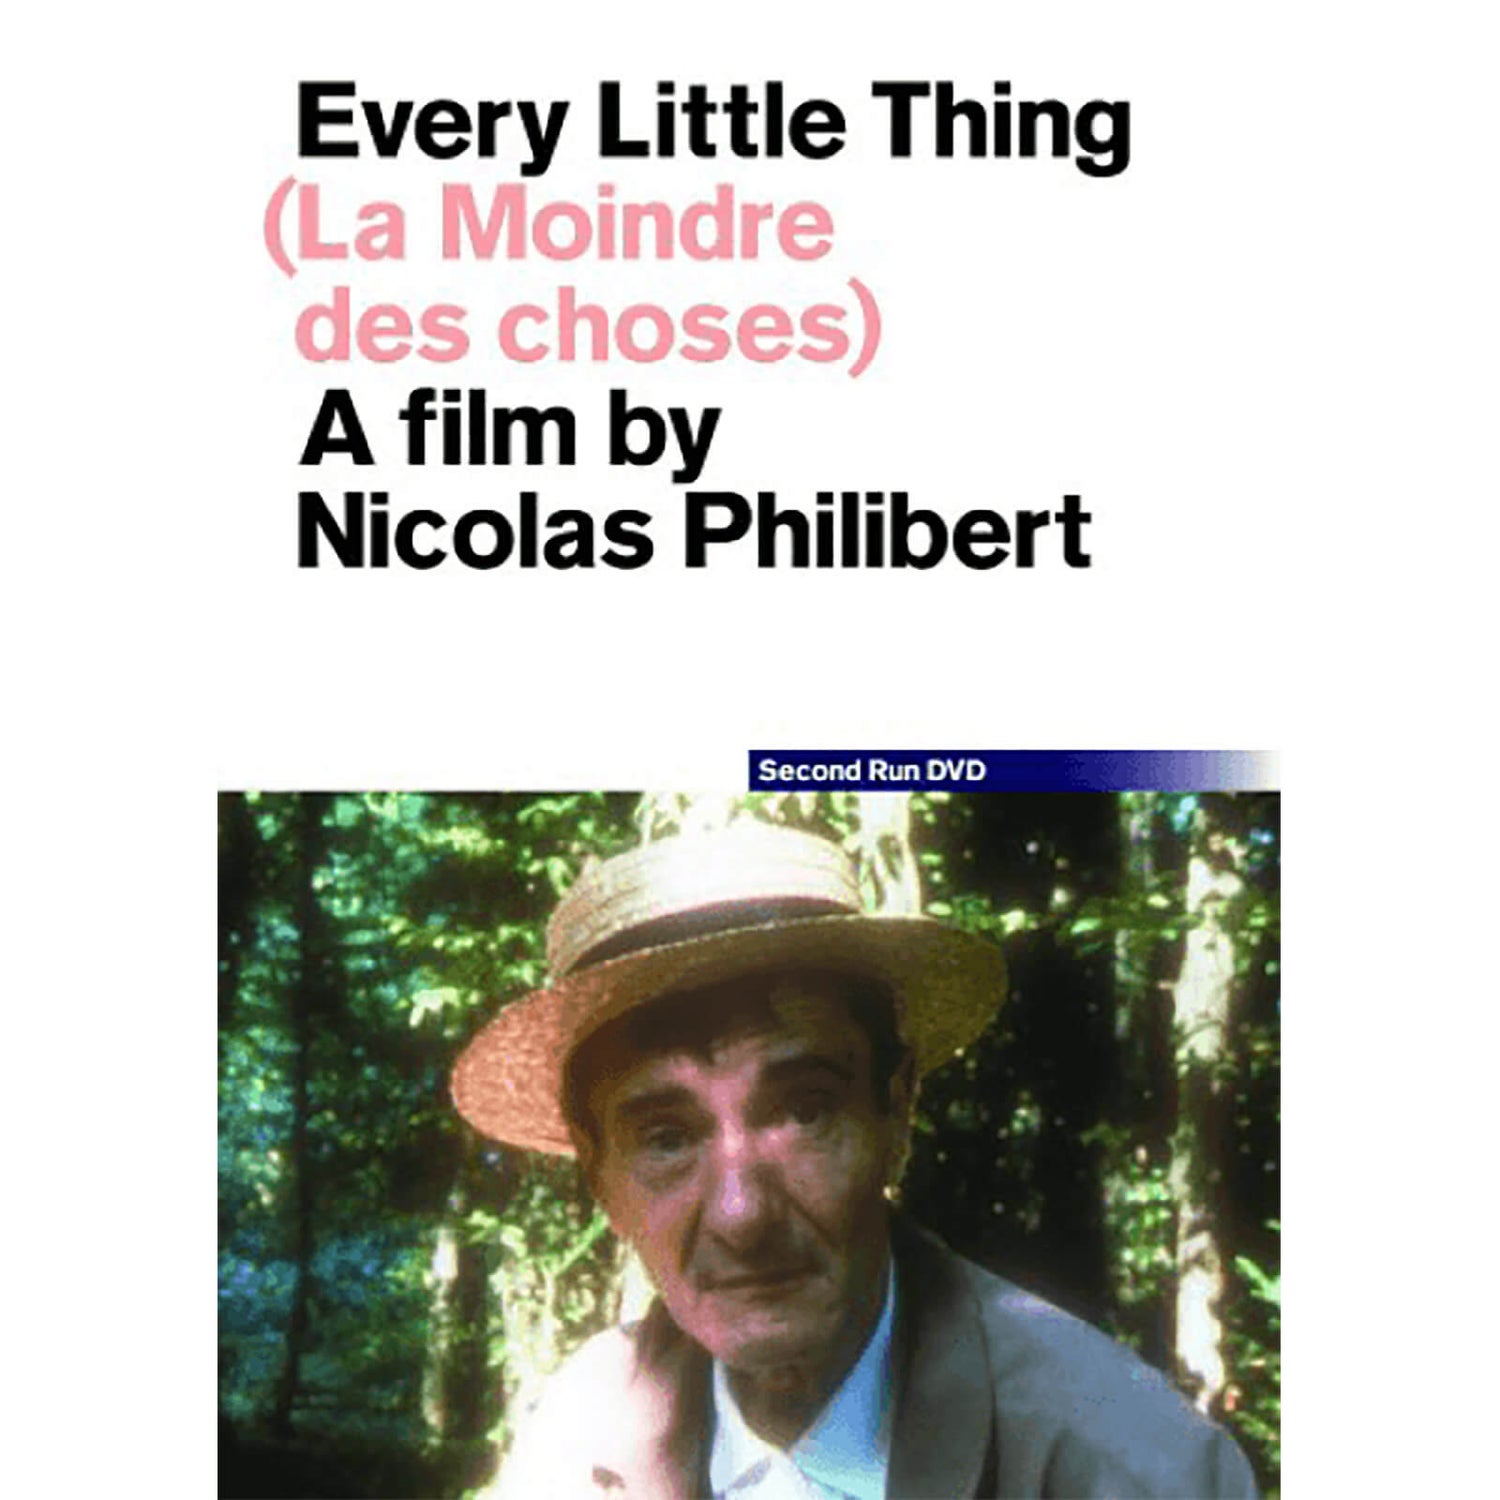 Every Little Thing DVD